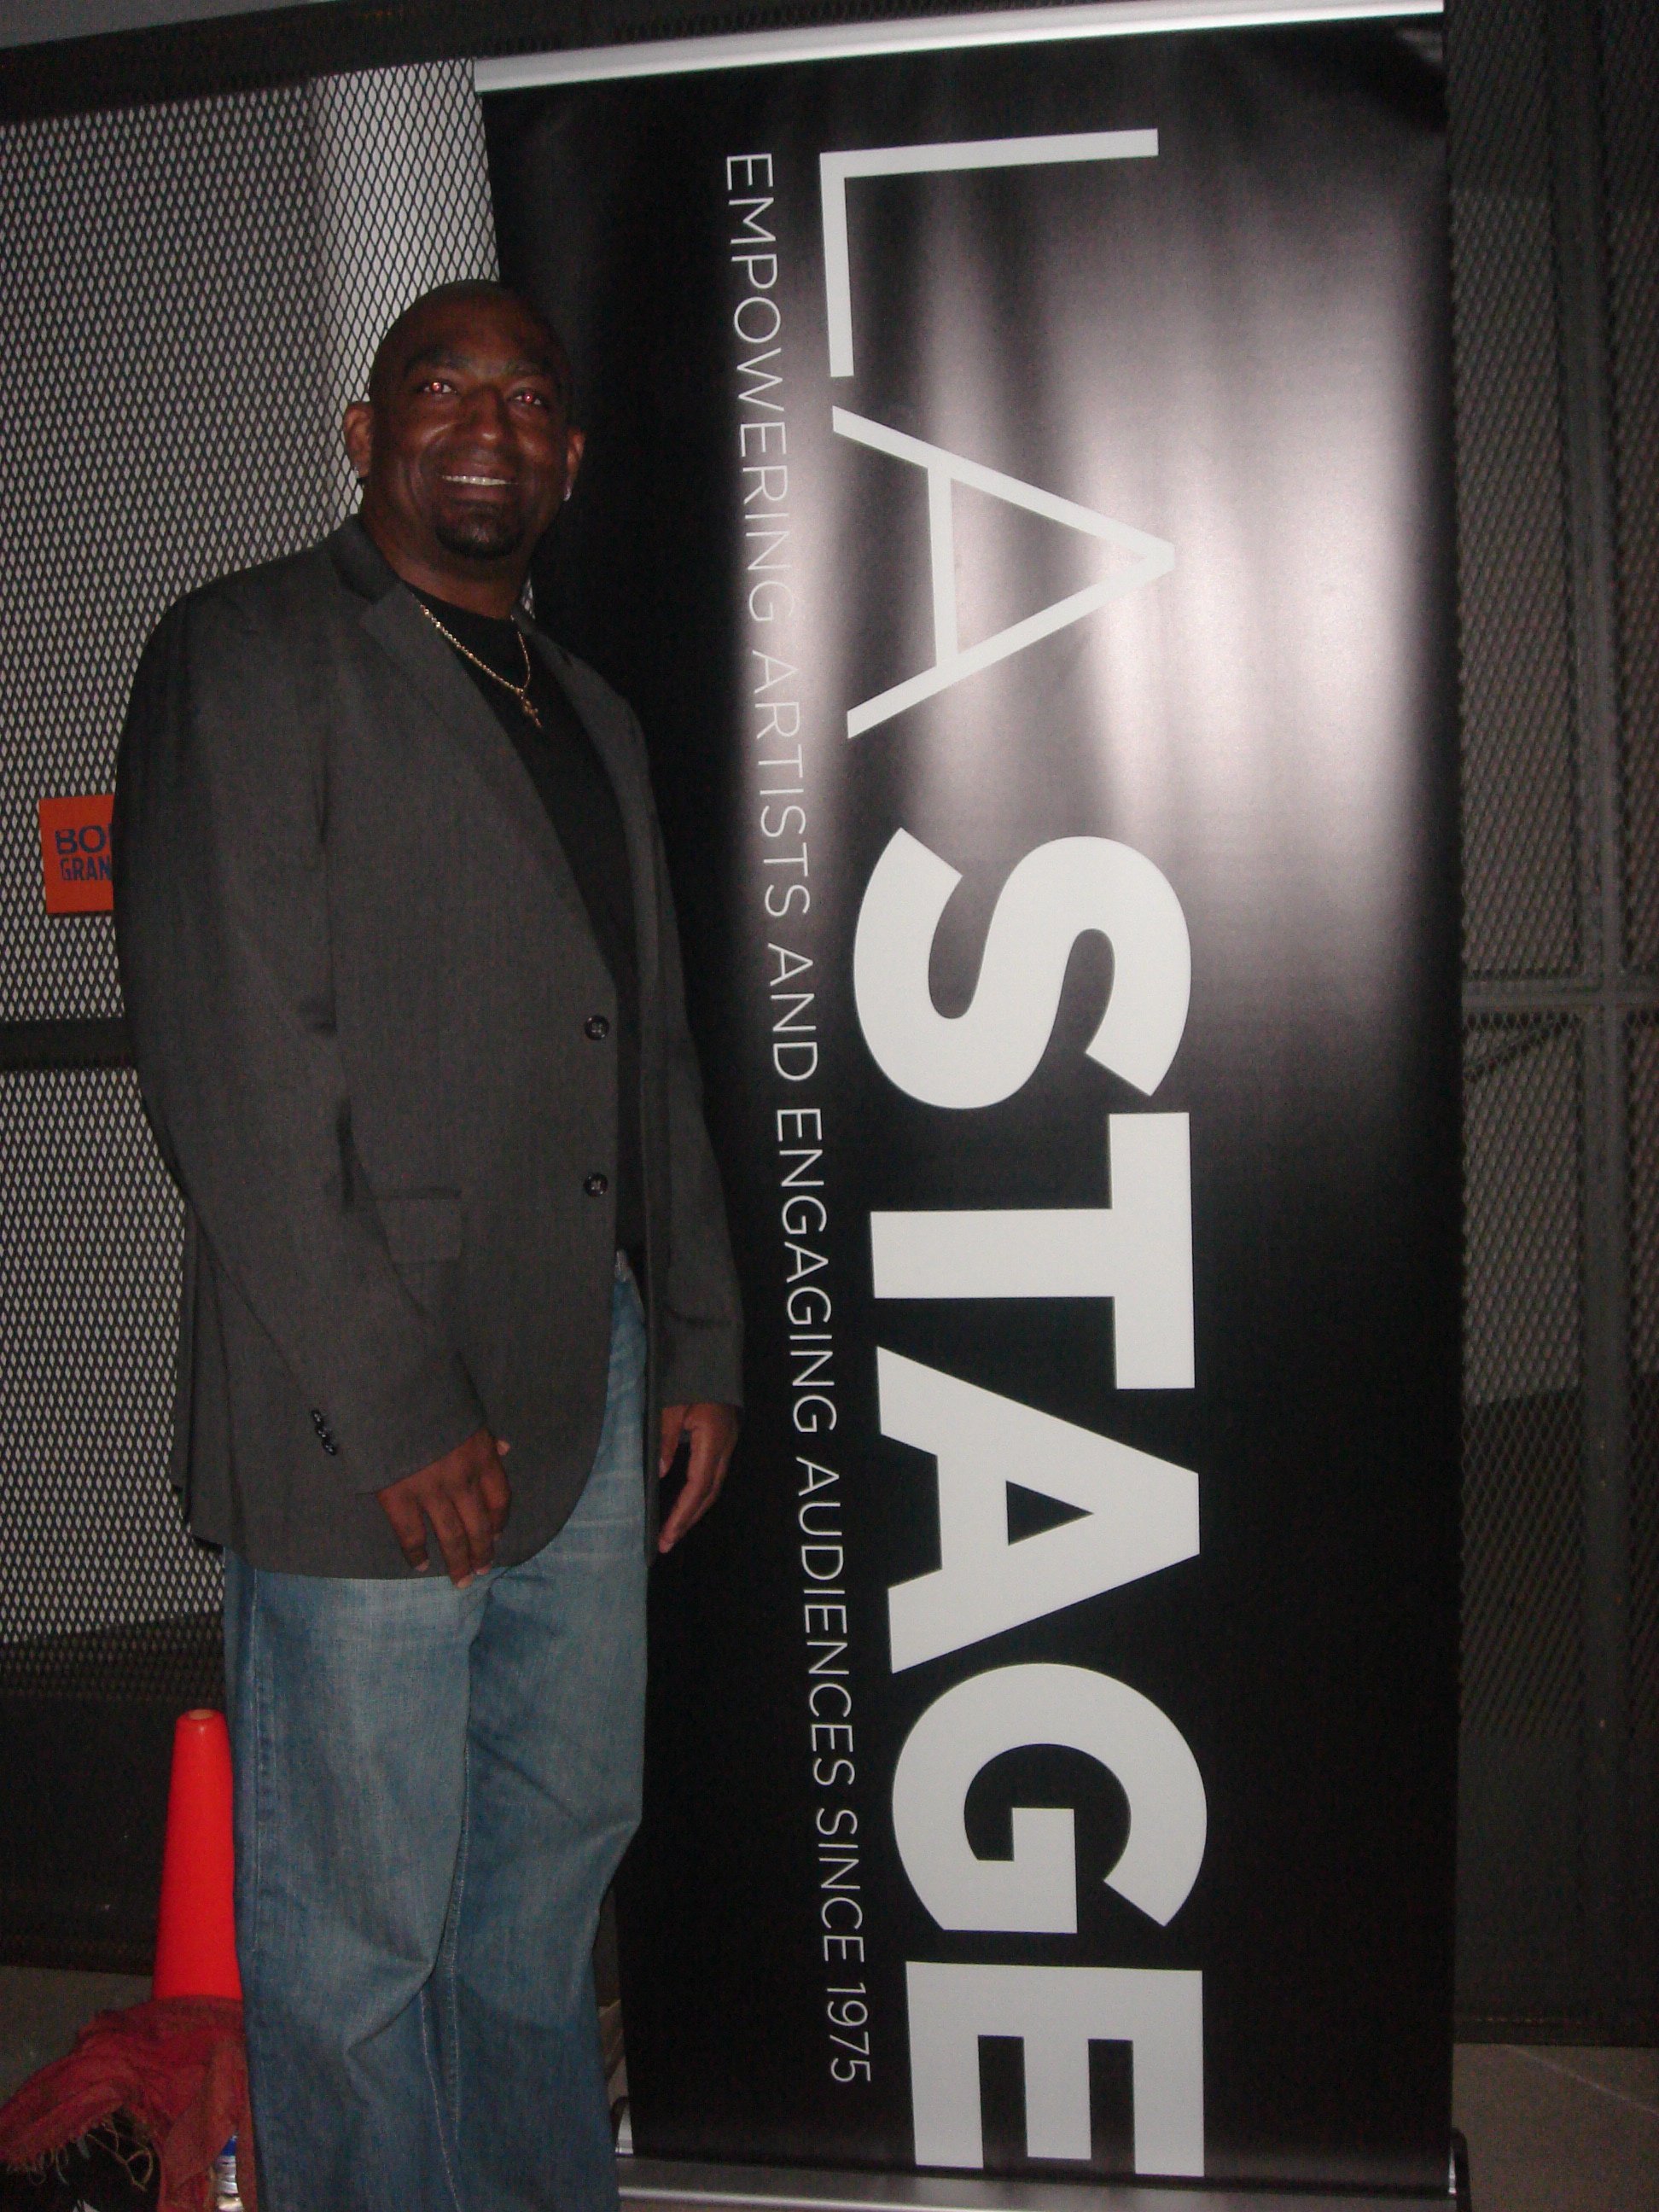 L. A. Stage Ovation Awards Nominee Ceremony for the Stage Play 